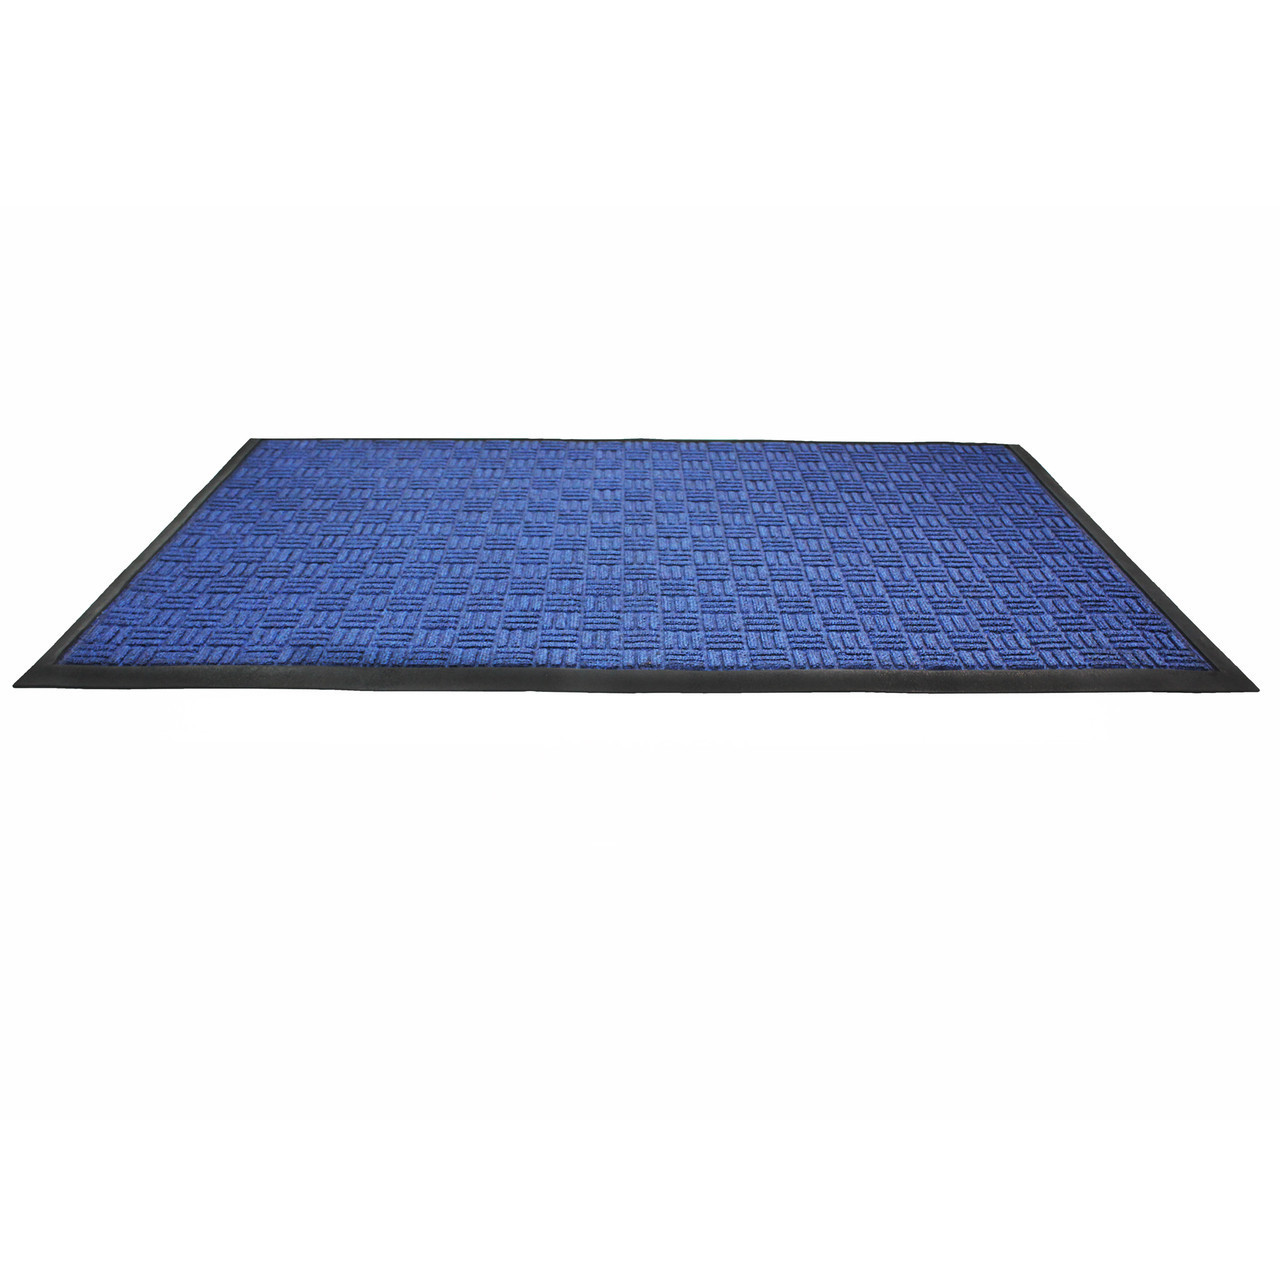 https://cdn11.bigcommerce.com/s-fjwps1jbkv/images/stencil/1280x1280/products/153/3803/ultralux-premium-indoor-outdoor-entrance-mat-or-absorbent-strong-anti-slip-entry-rug-heavy-duty-doormat-or-blue__94093.1688995114.jpg?c=2?imbypass=on